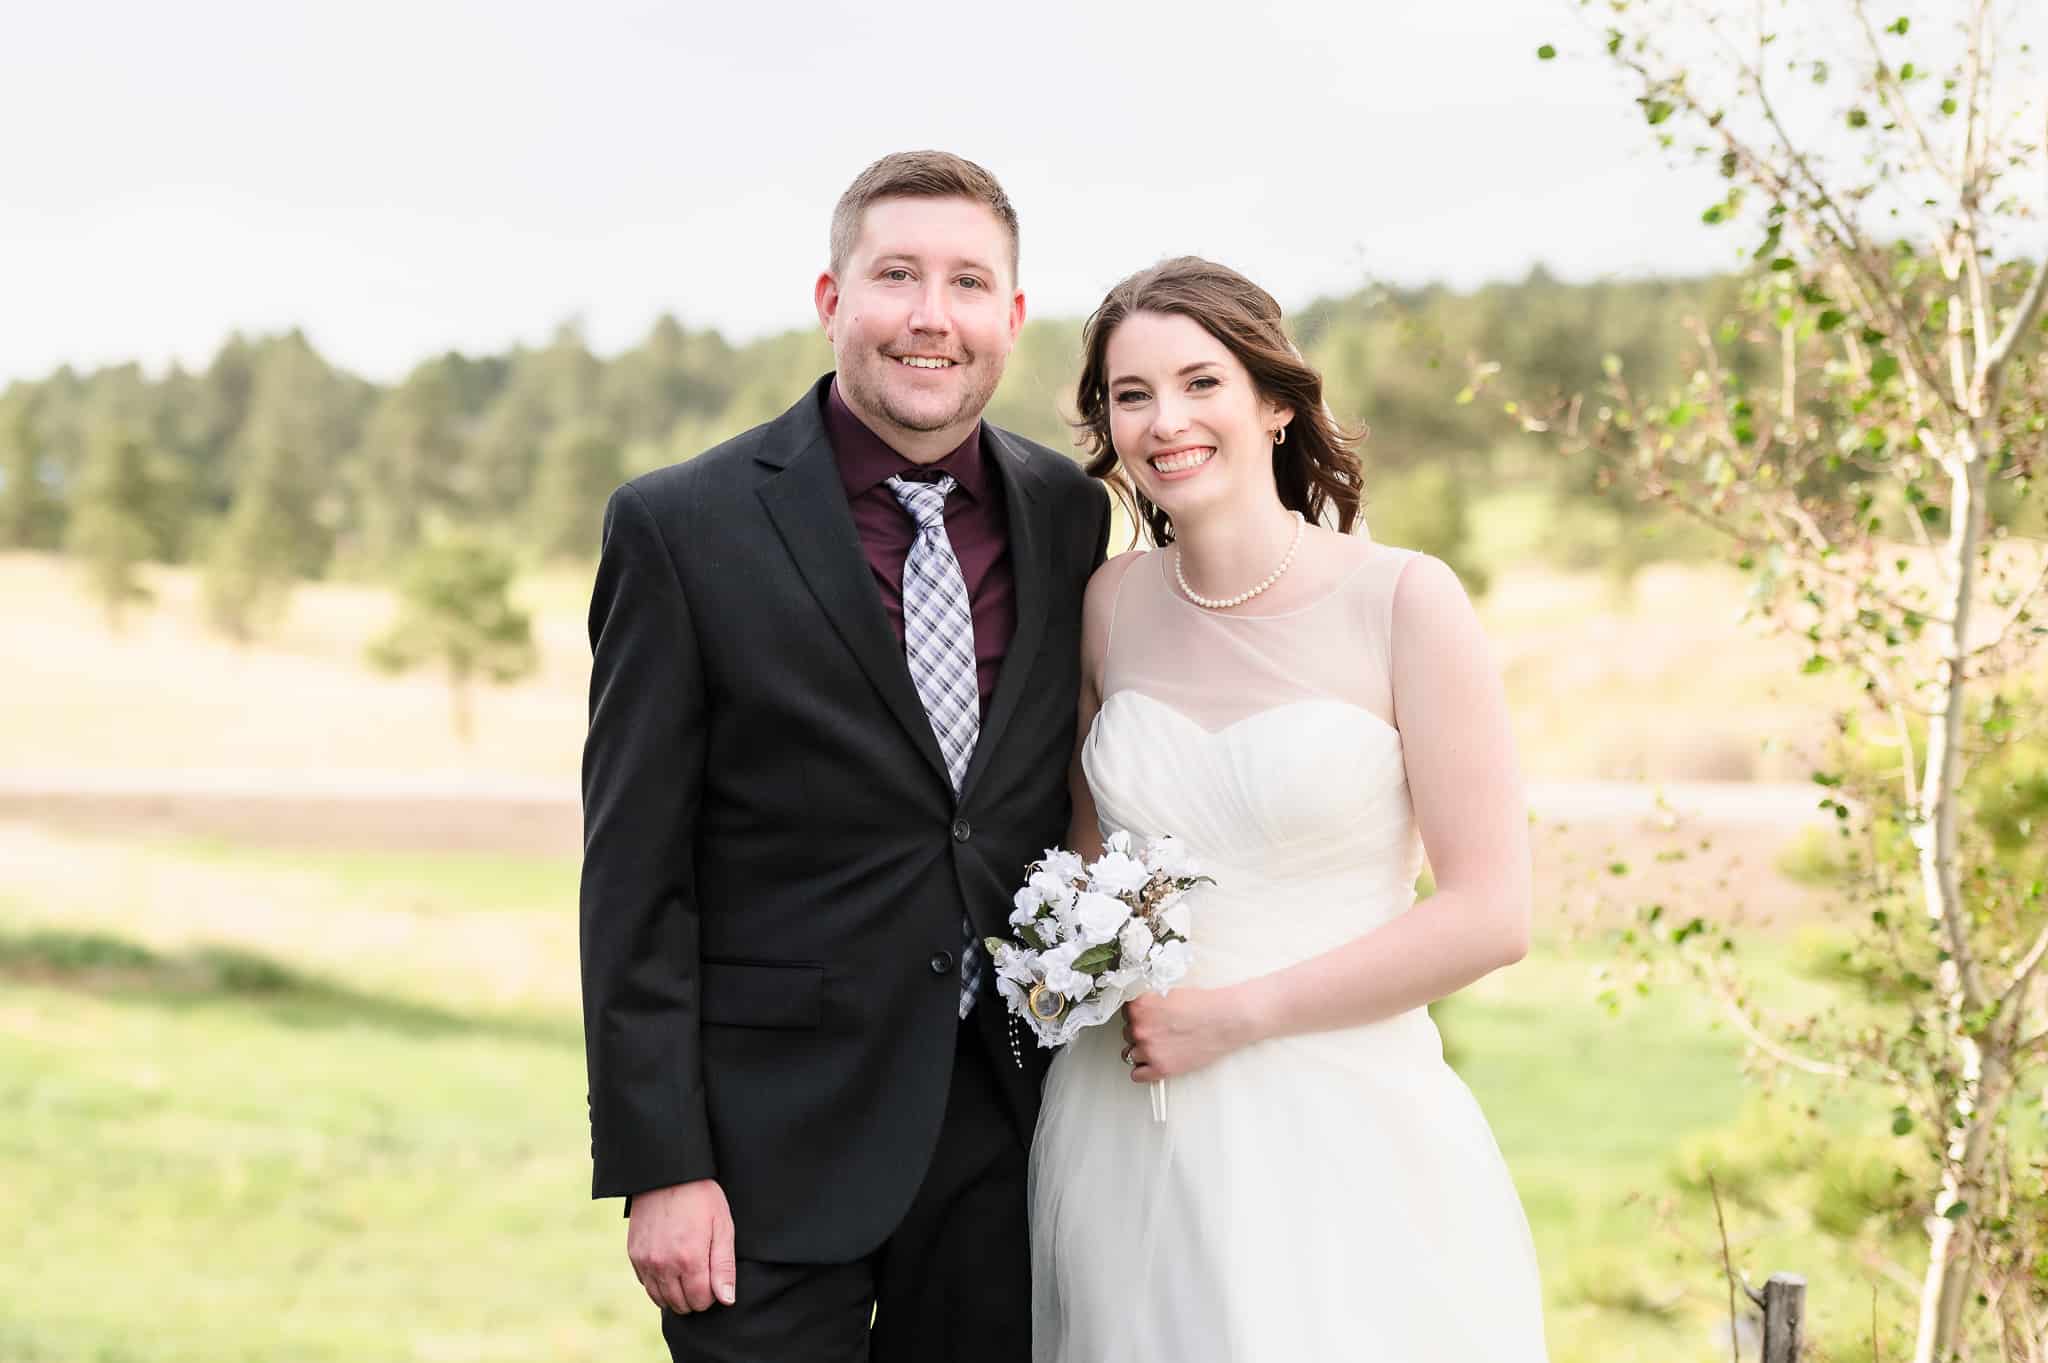 A bride and groom at the rustic 1C Barn in Monument, Colorado pose for a portrait in front of the natural grasses and trees.